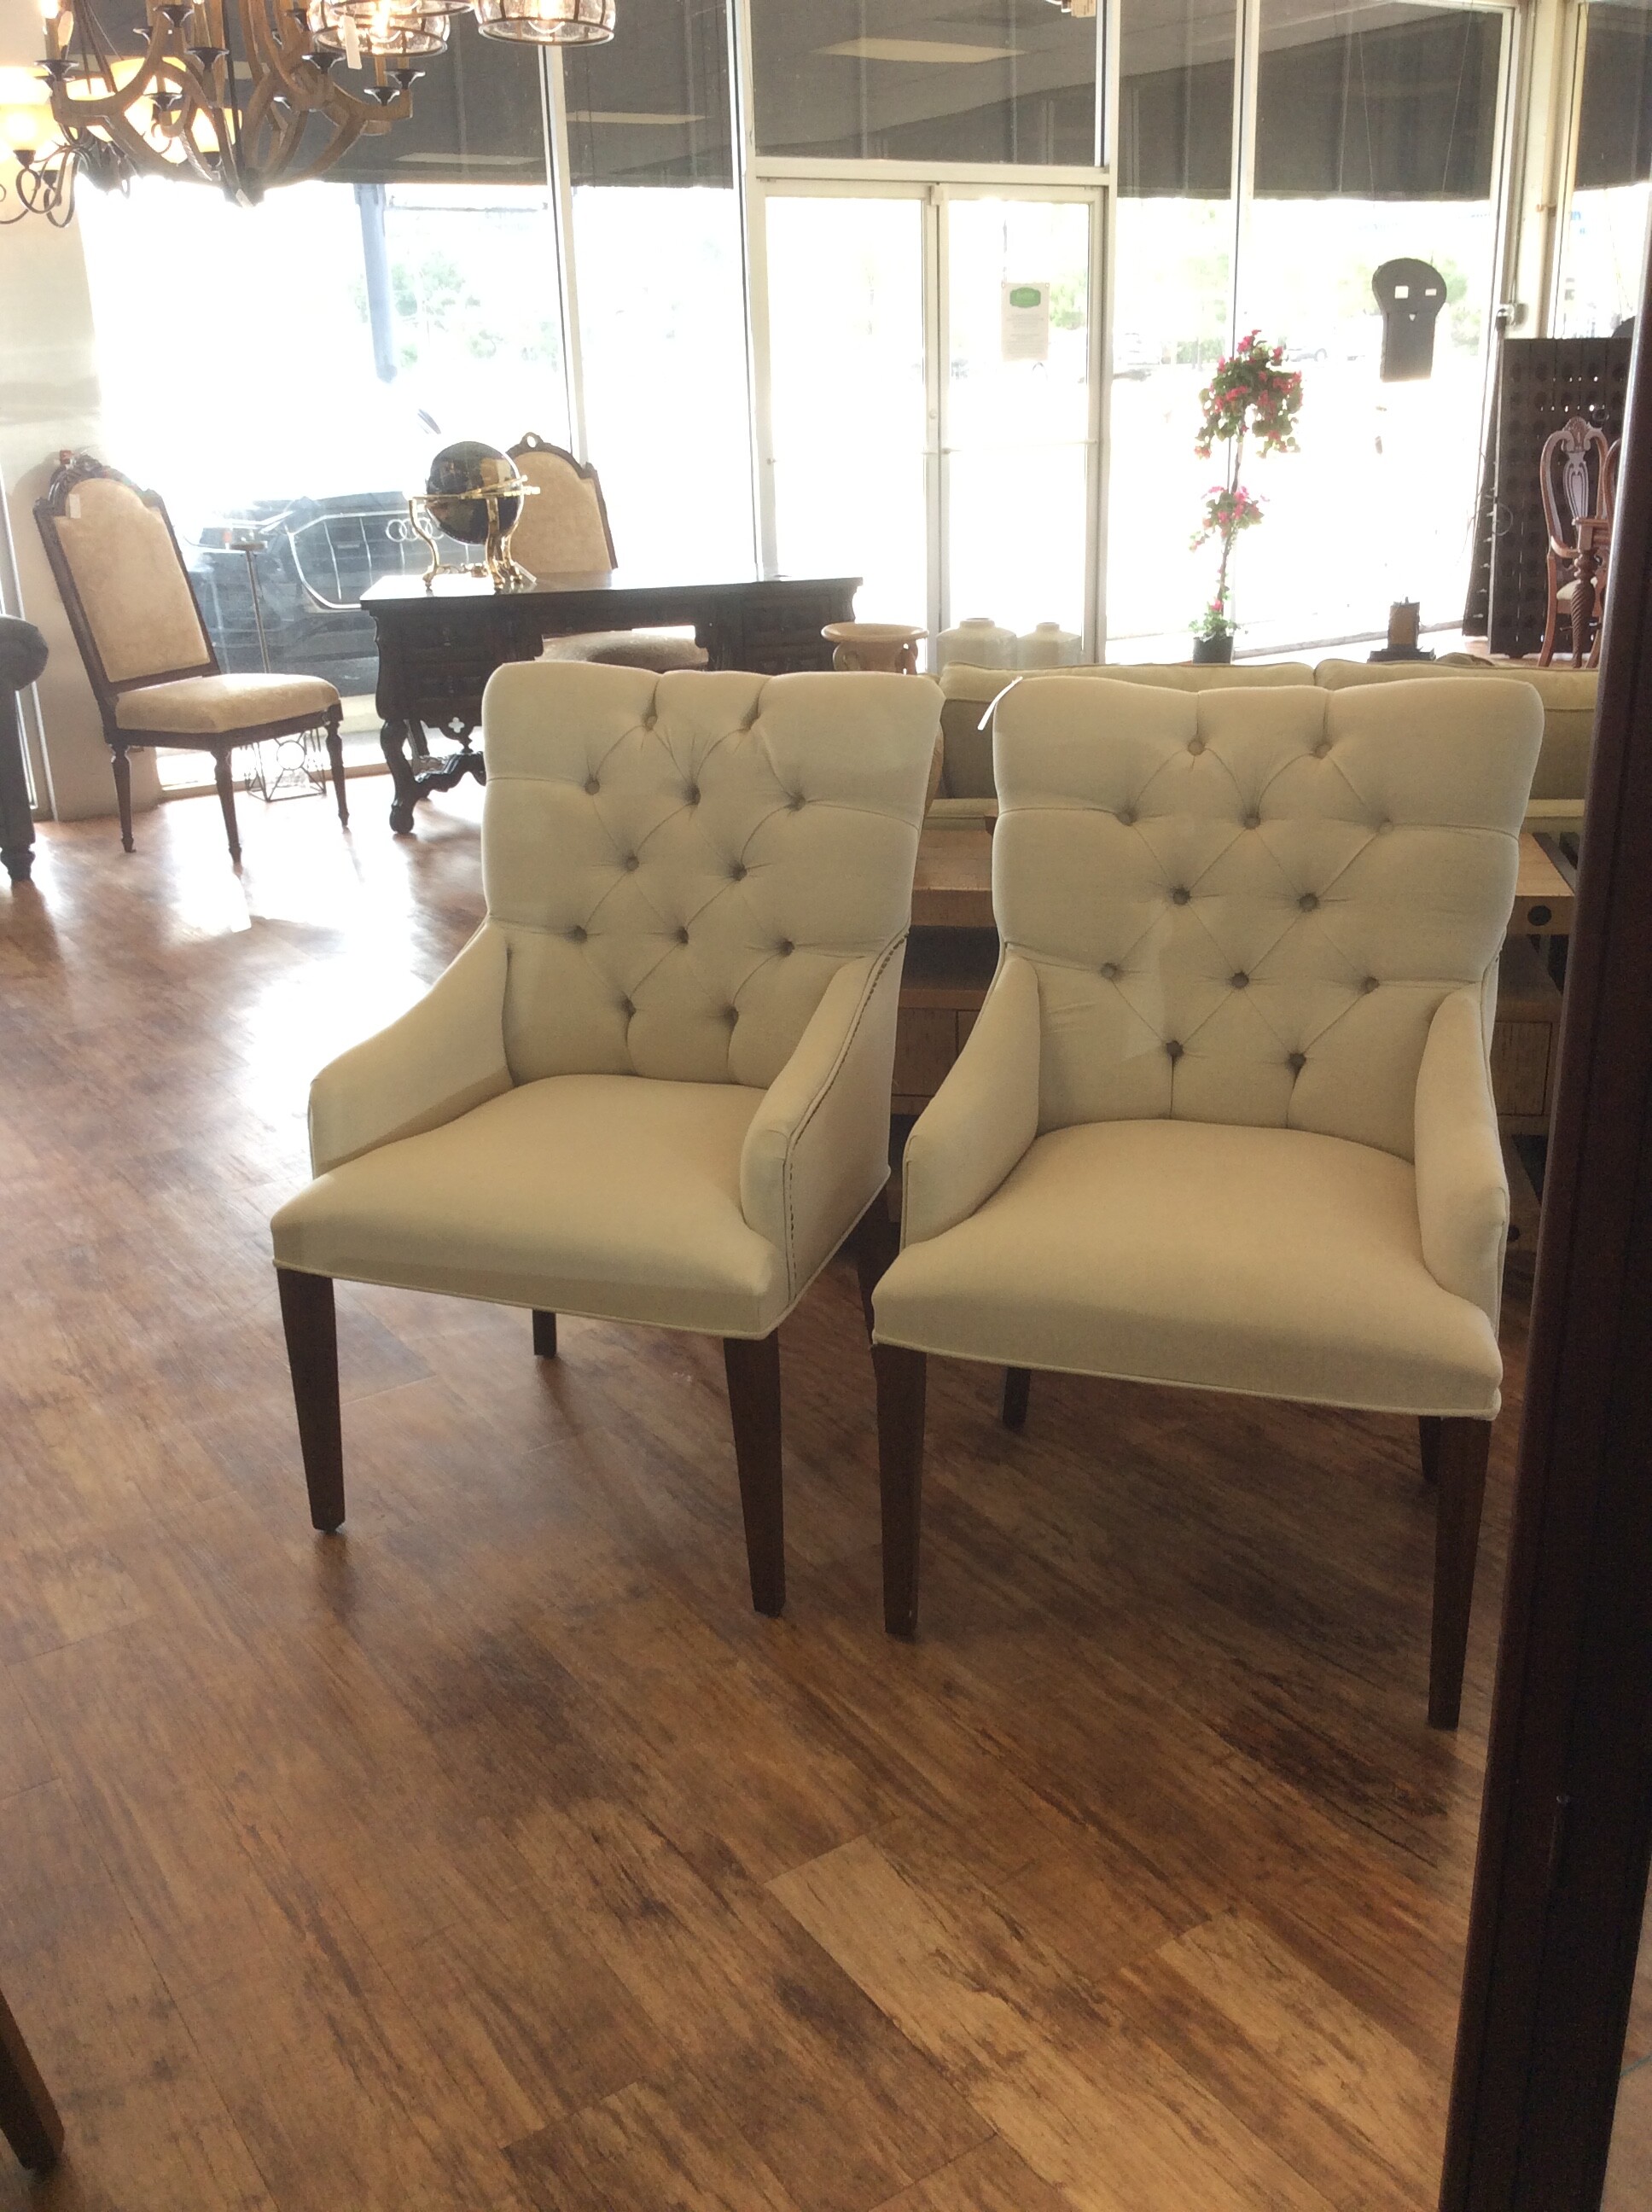 This is a pair of beige, upholsterd, tuffed arm chairs. These chairs have dark brown legs and nailhead trim